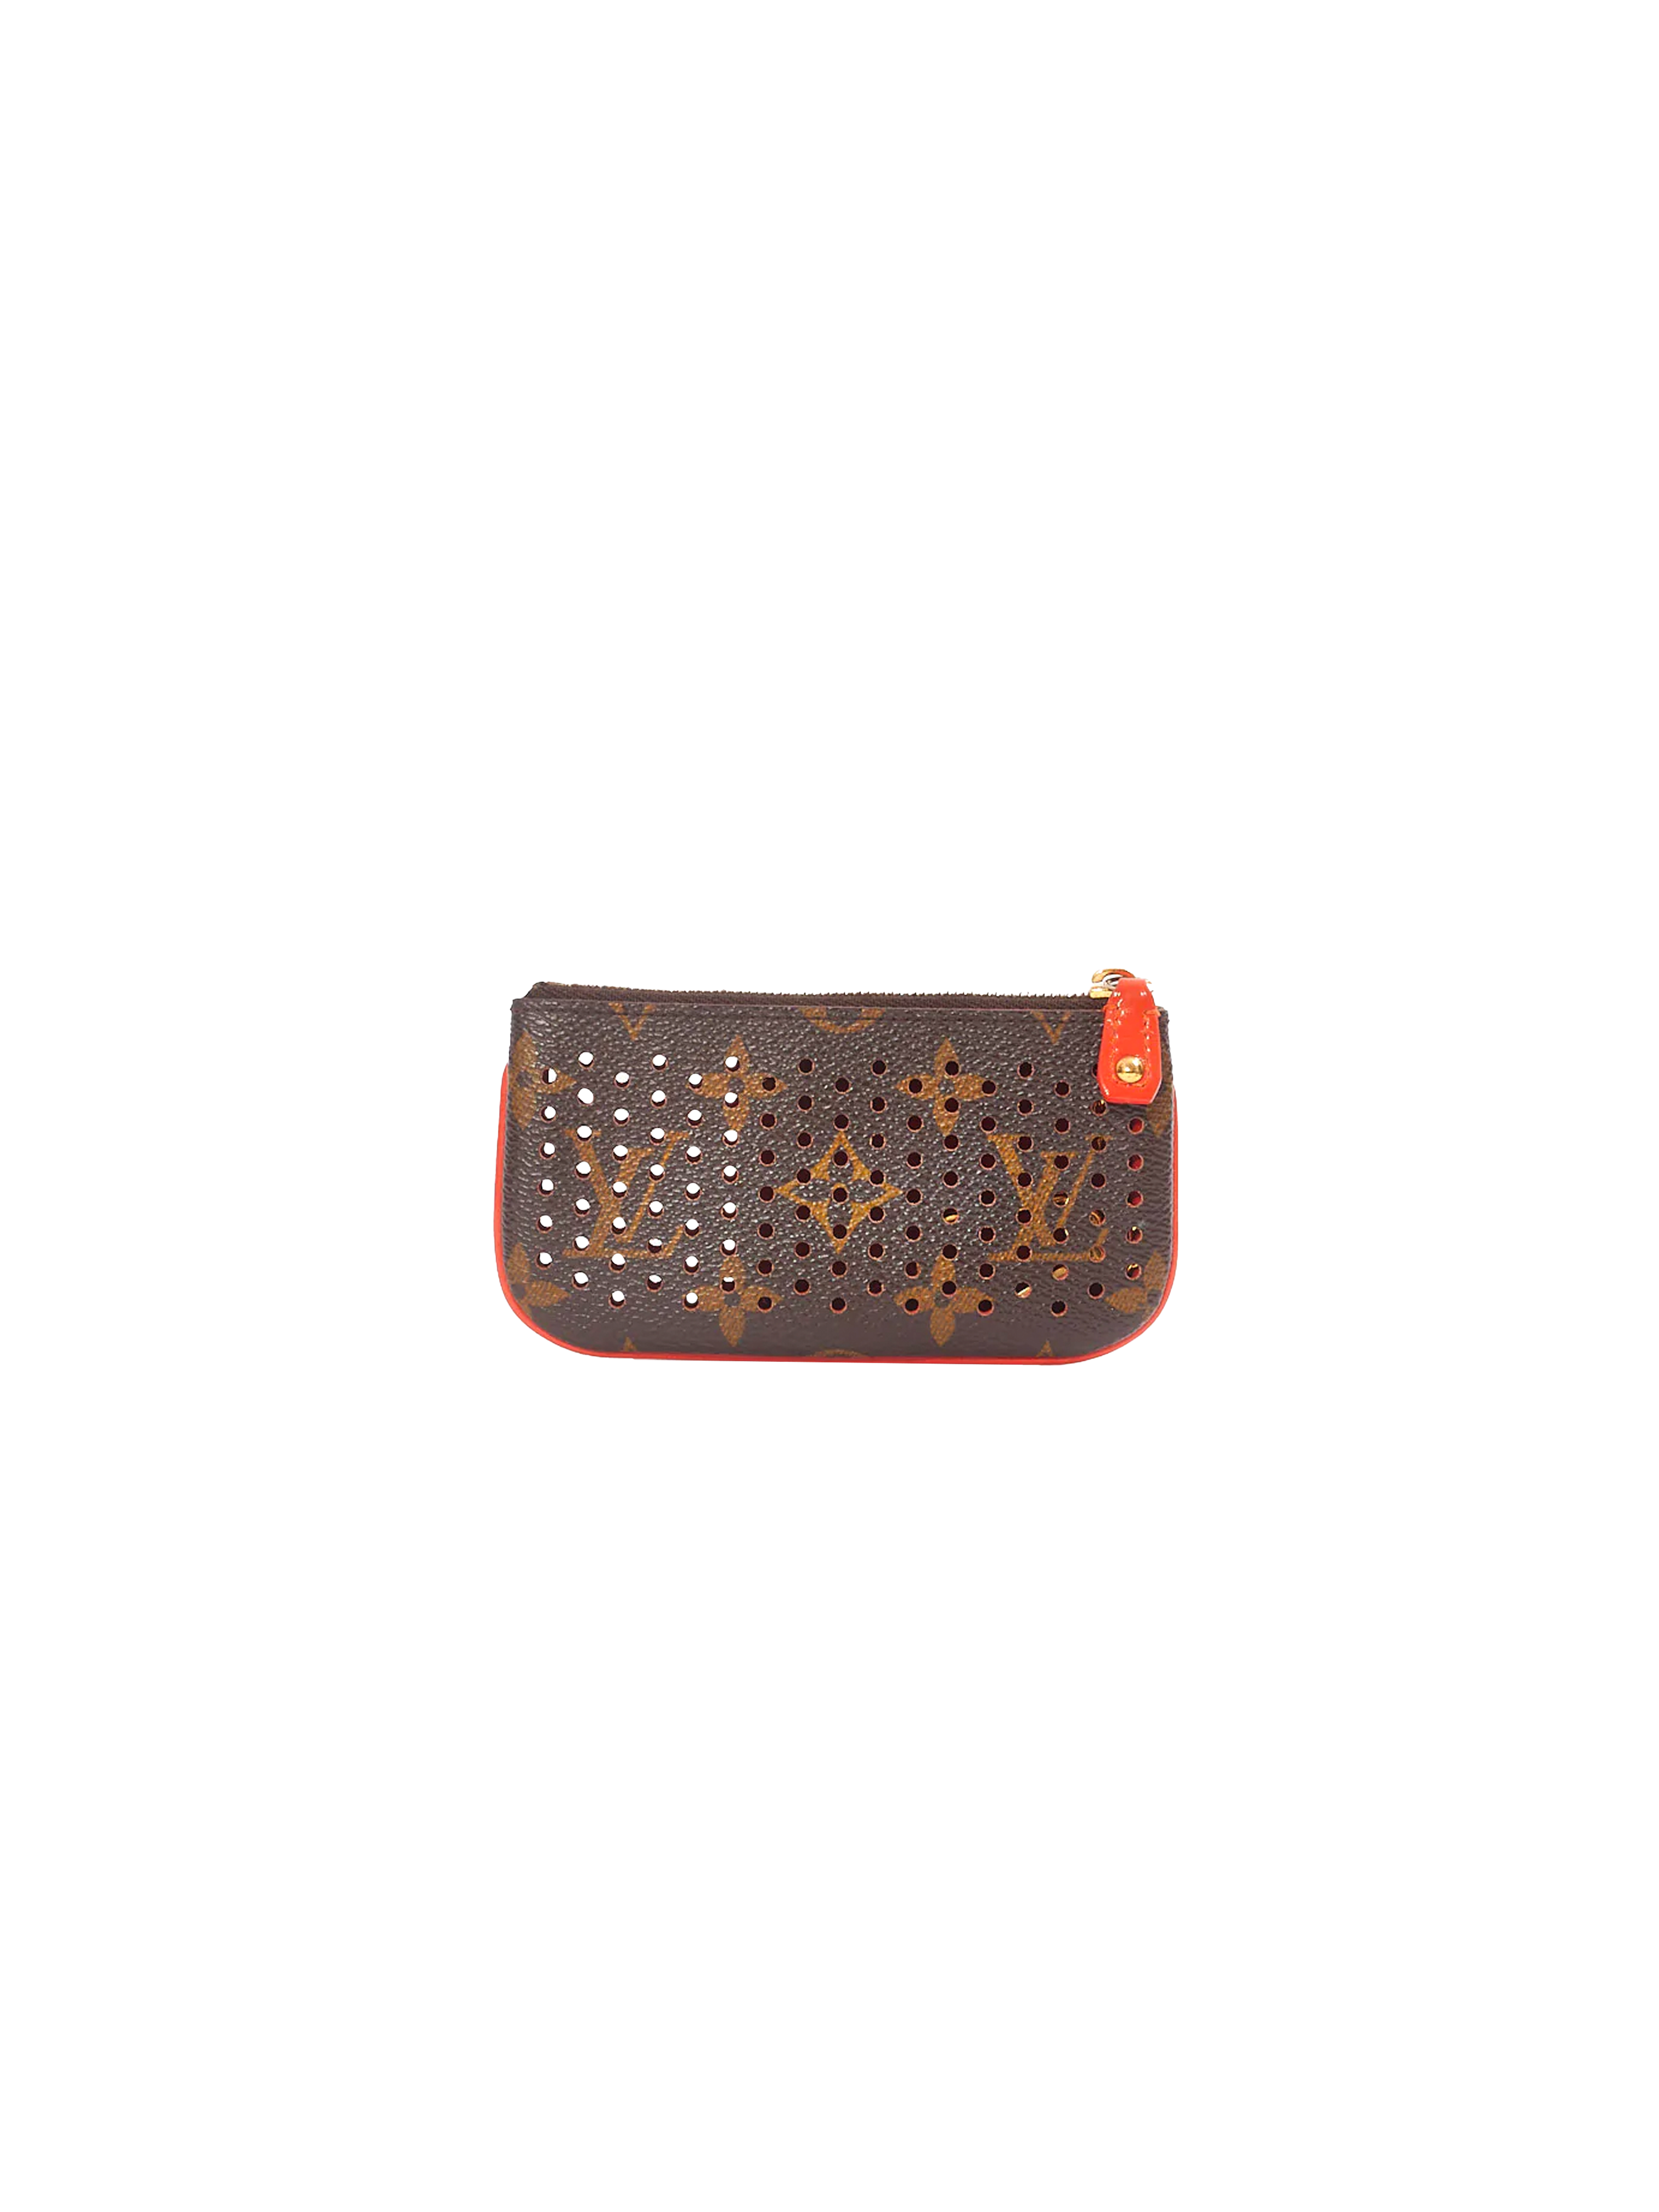 Louis Vuitton 2008 Perforated Coin Purse